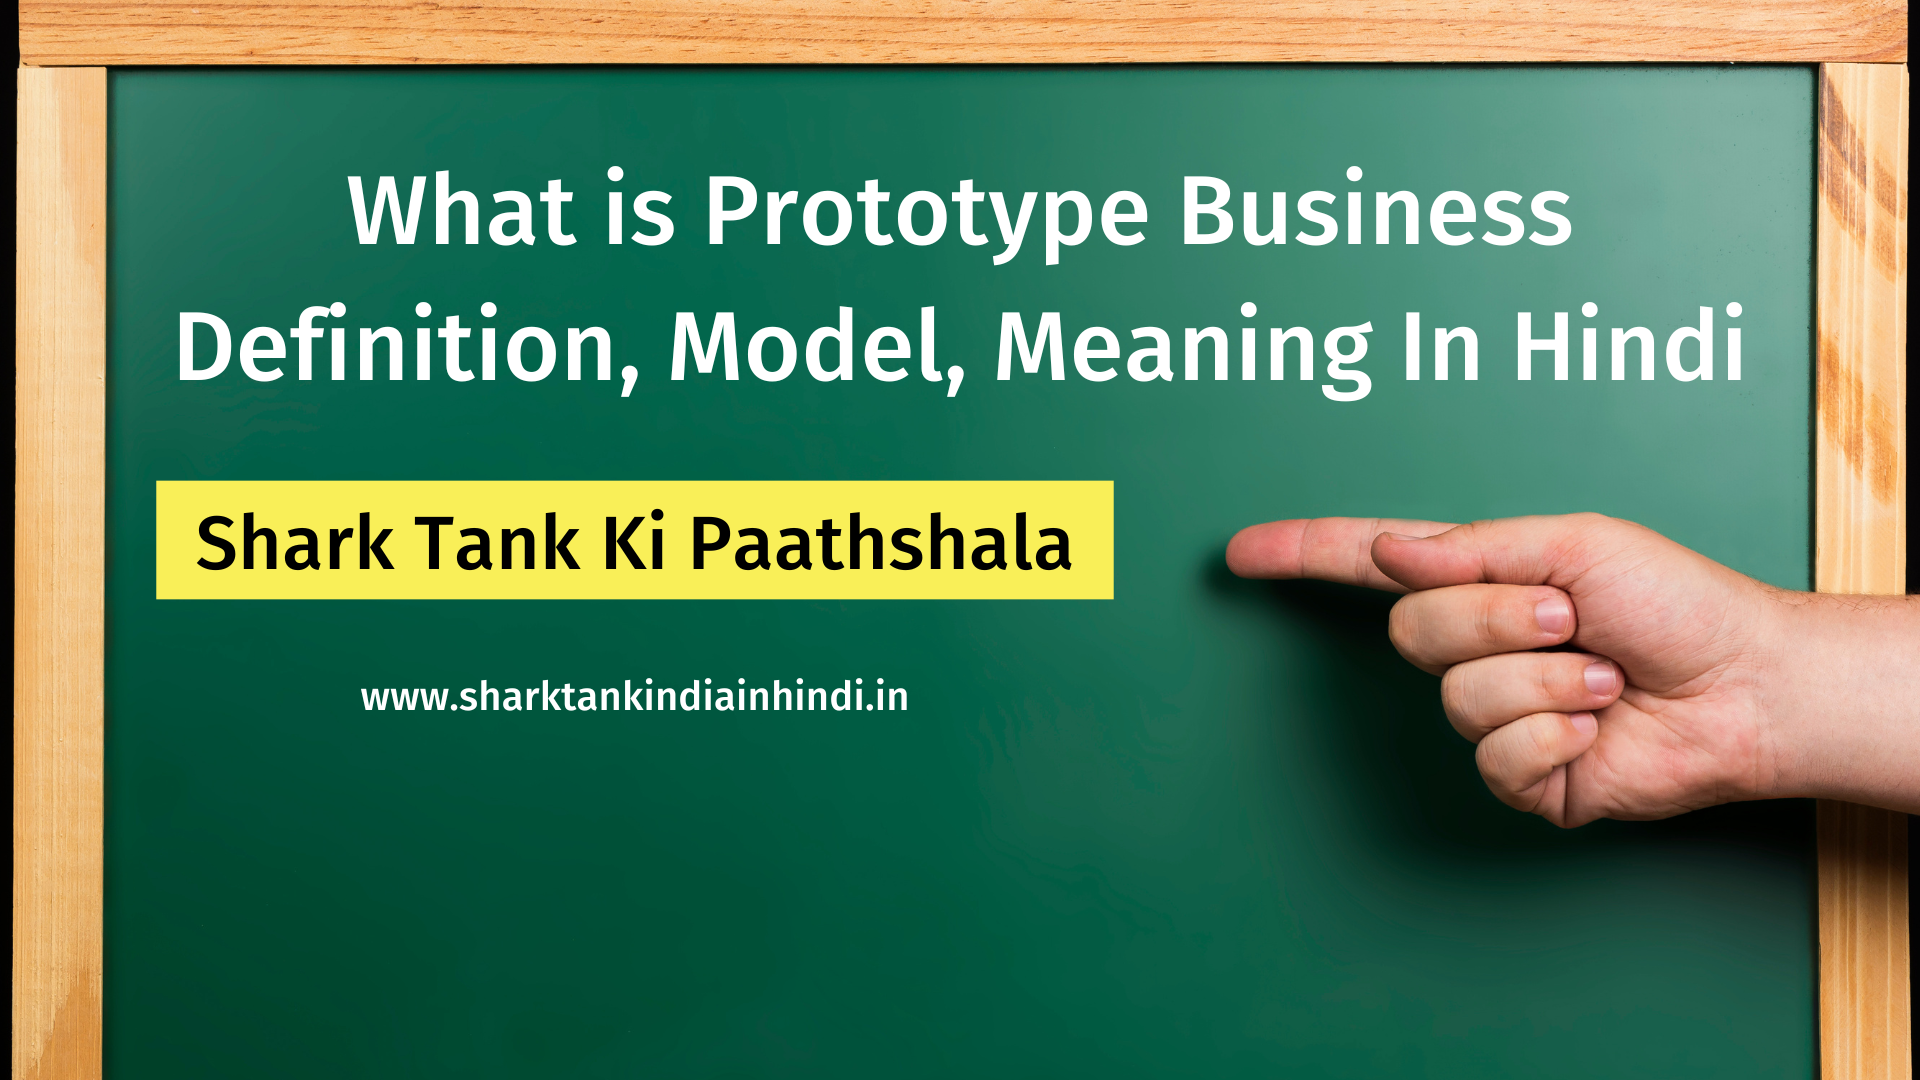 What is Prototype Business Definition, Model, Meaning In Hindi